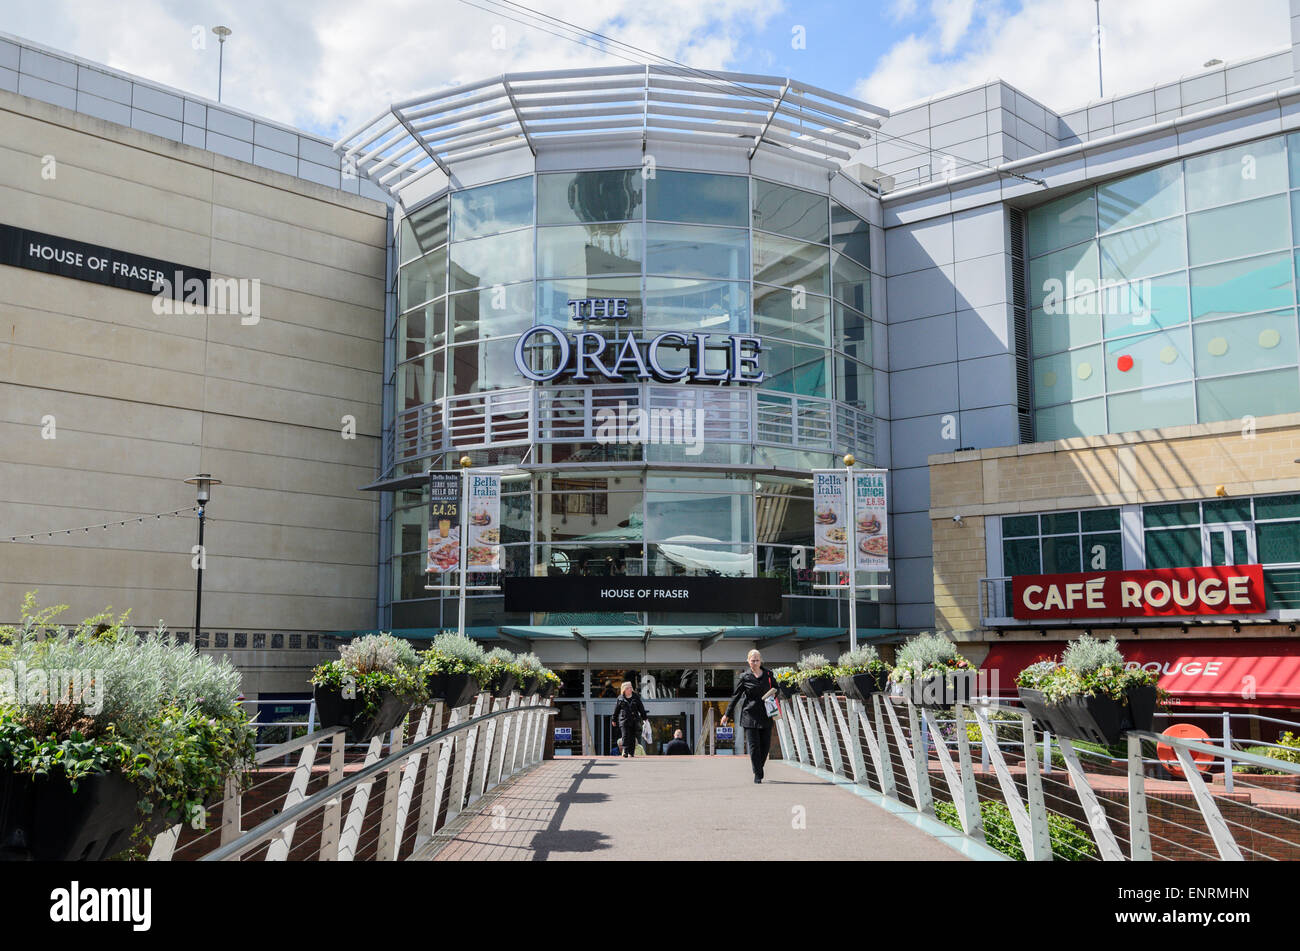 An exterior view of The Oracle Shopping Centre, Reading, U.K. The Oracle is a large regional destination centre run by Hammerson Stock Photo